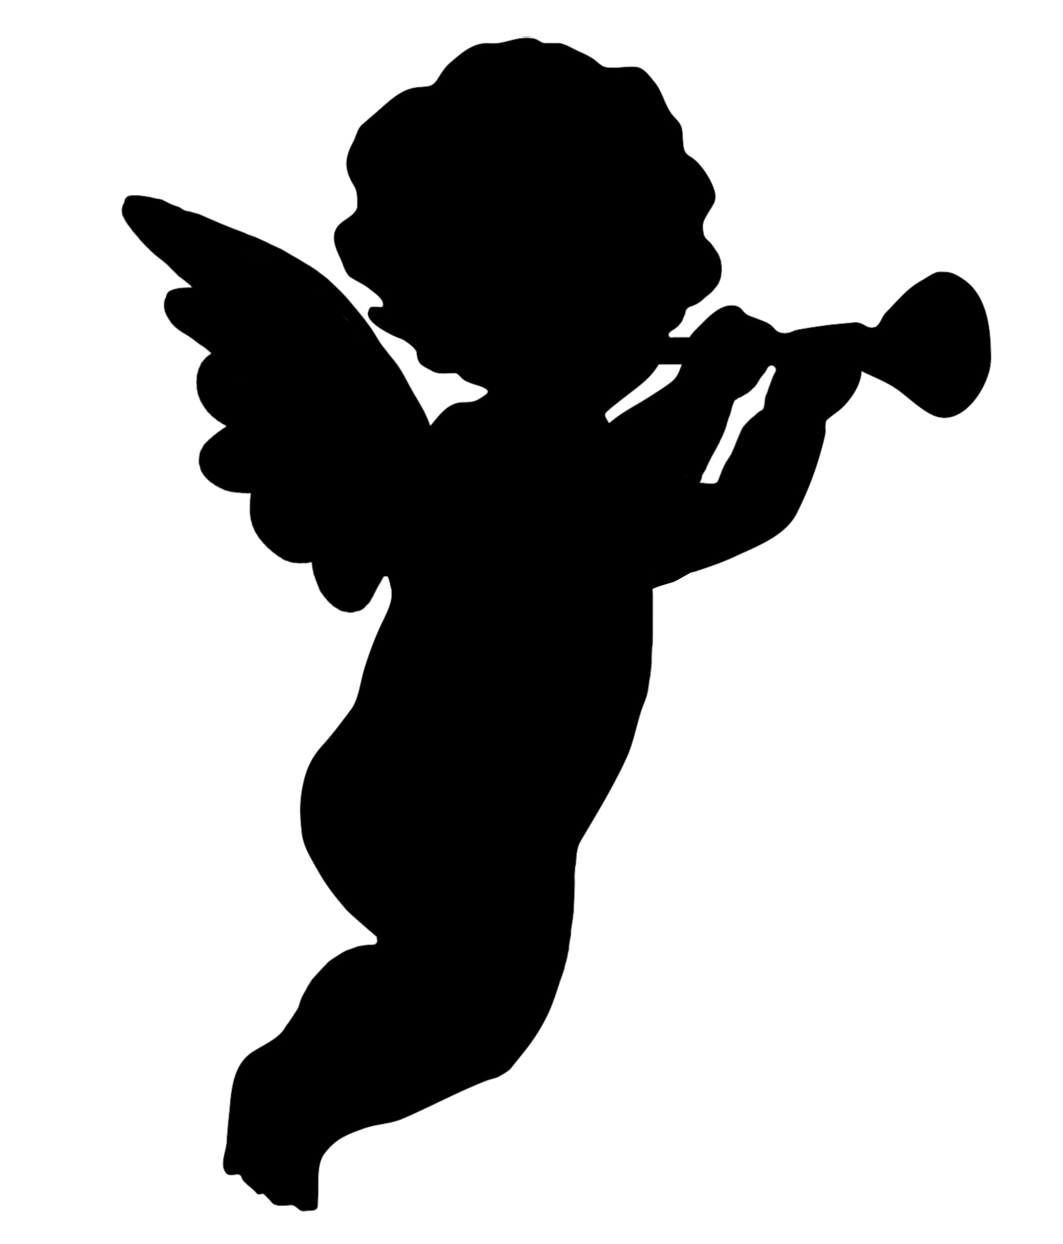 Angel Silhouette Stock Photos, Images and Backgrounds for Free